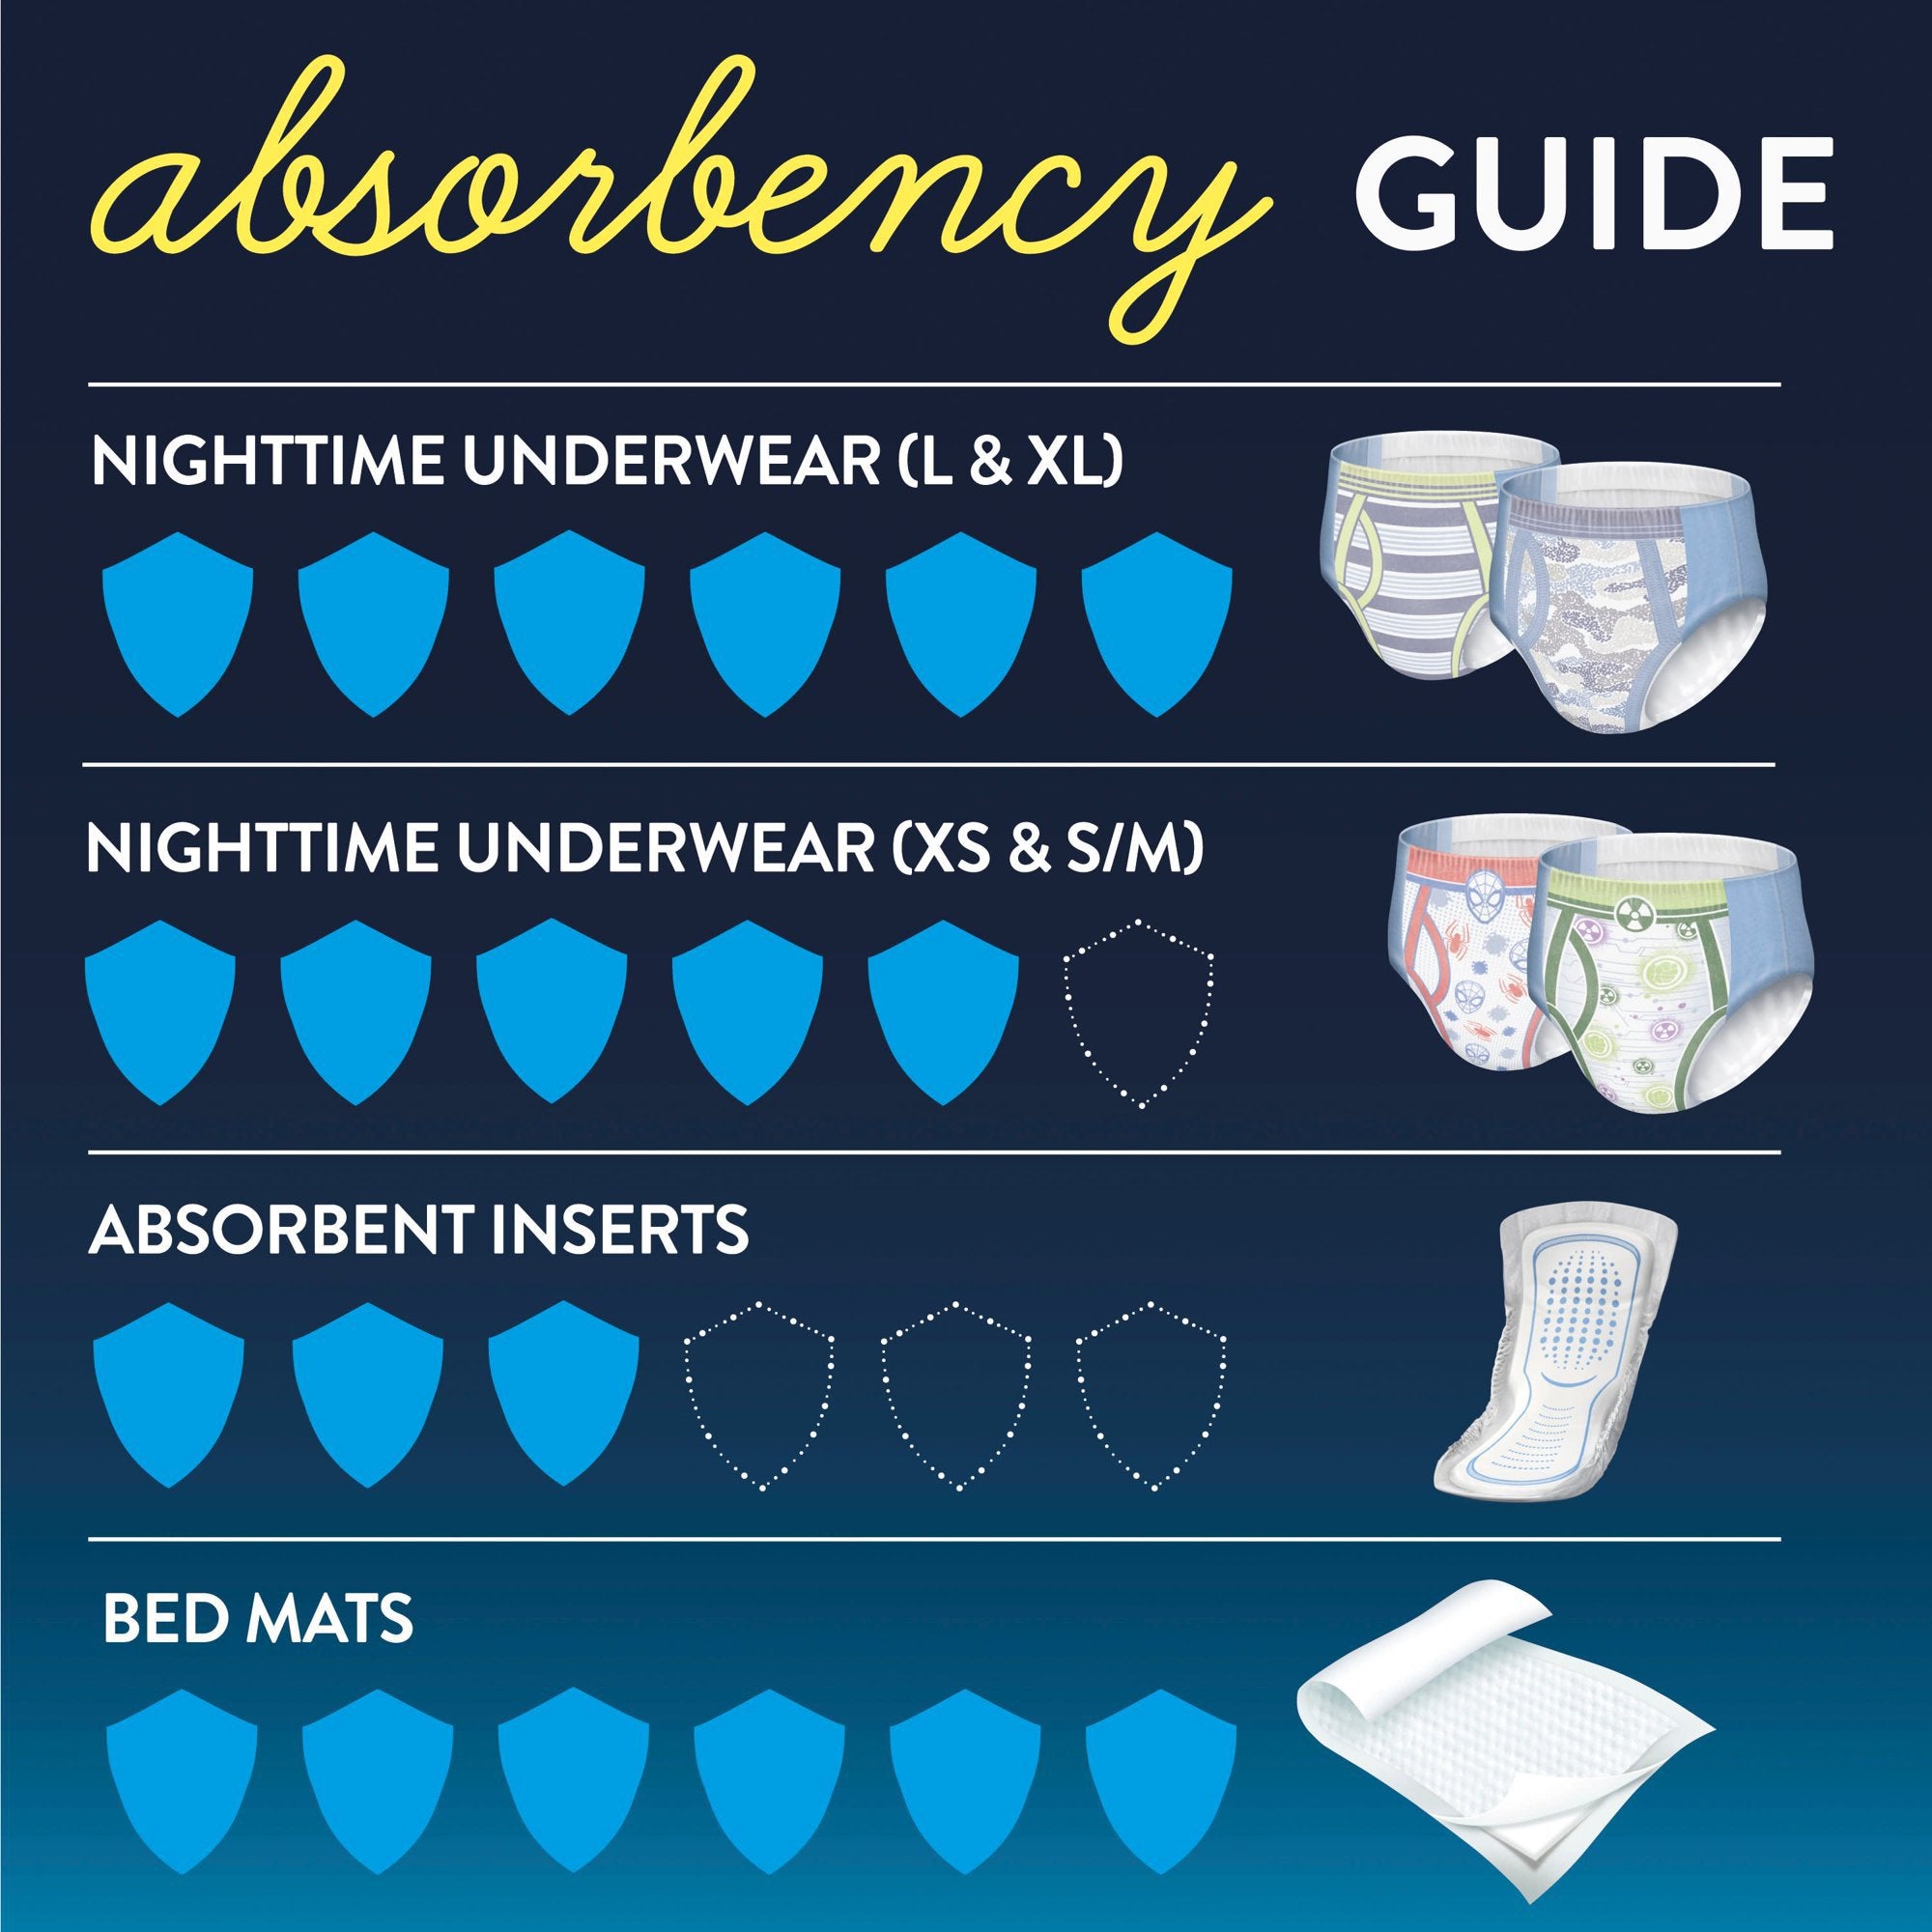 Male Youth Absorbent Underwear GoodNites Pull On with Tear Away Seams Size 5 / Large Disposable Heavy Absorbency